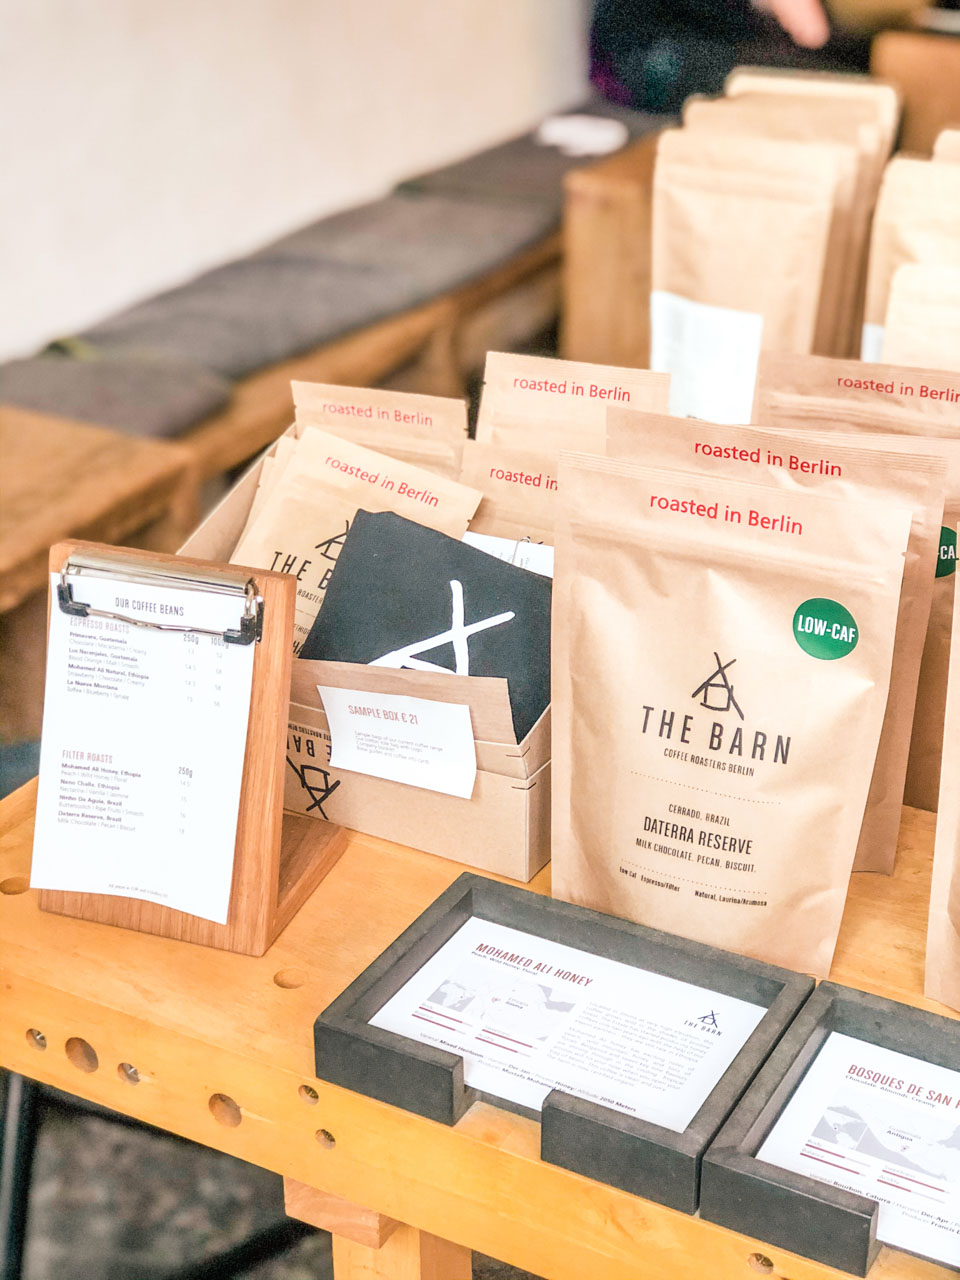 Sample bags of specialty coffee beans on a wooden table at The Barn Coffee Roastery in Berlin